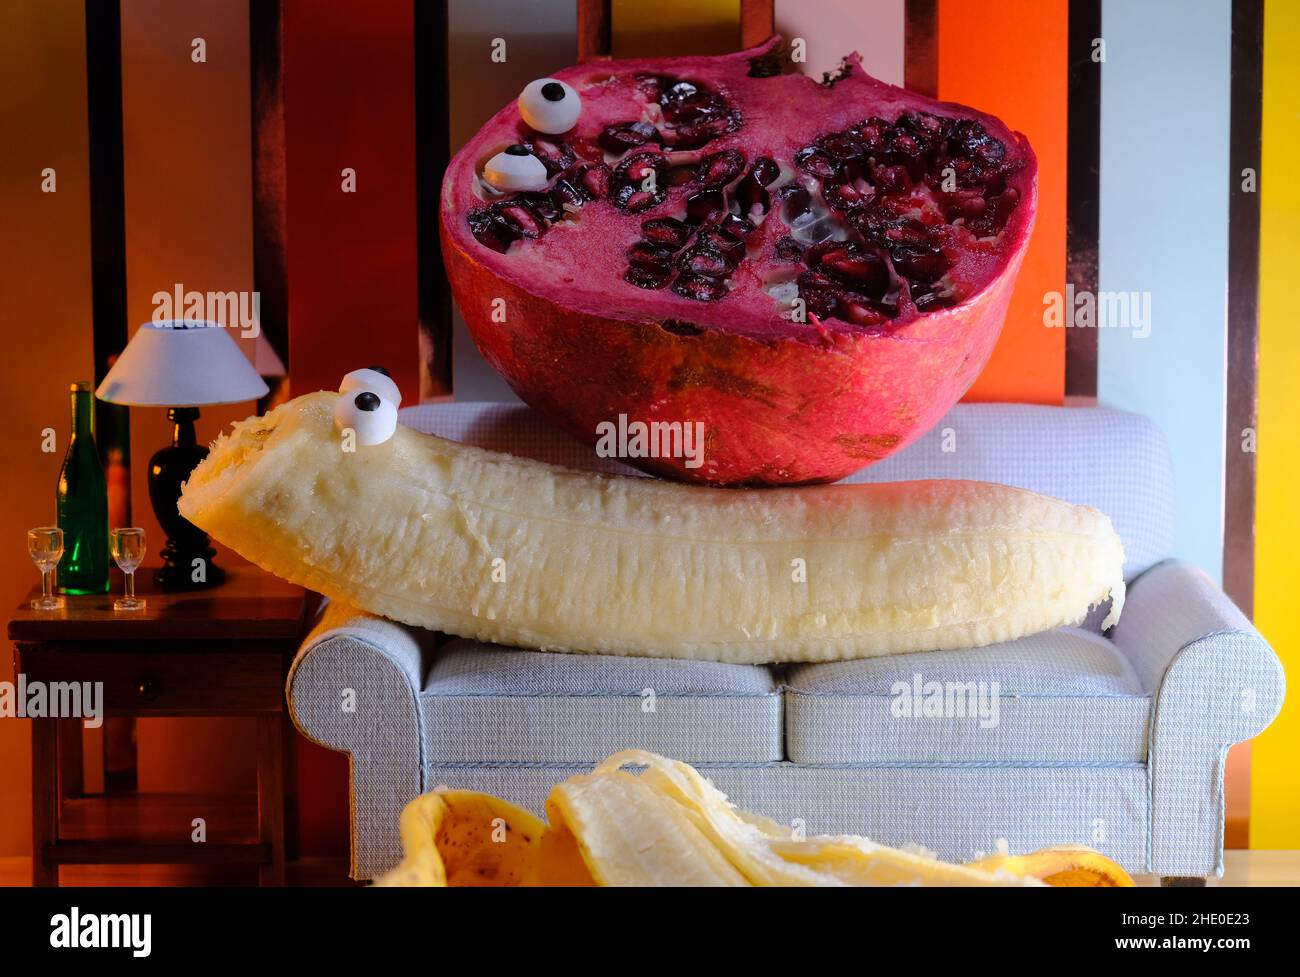 Anthropomorphic pomegranate and banana having an intimate experience on the couch Stock Photo